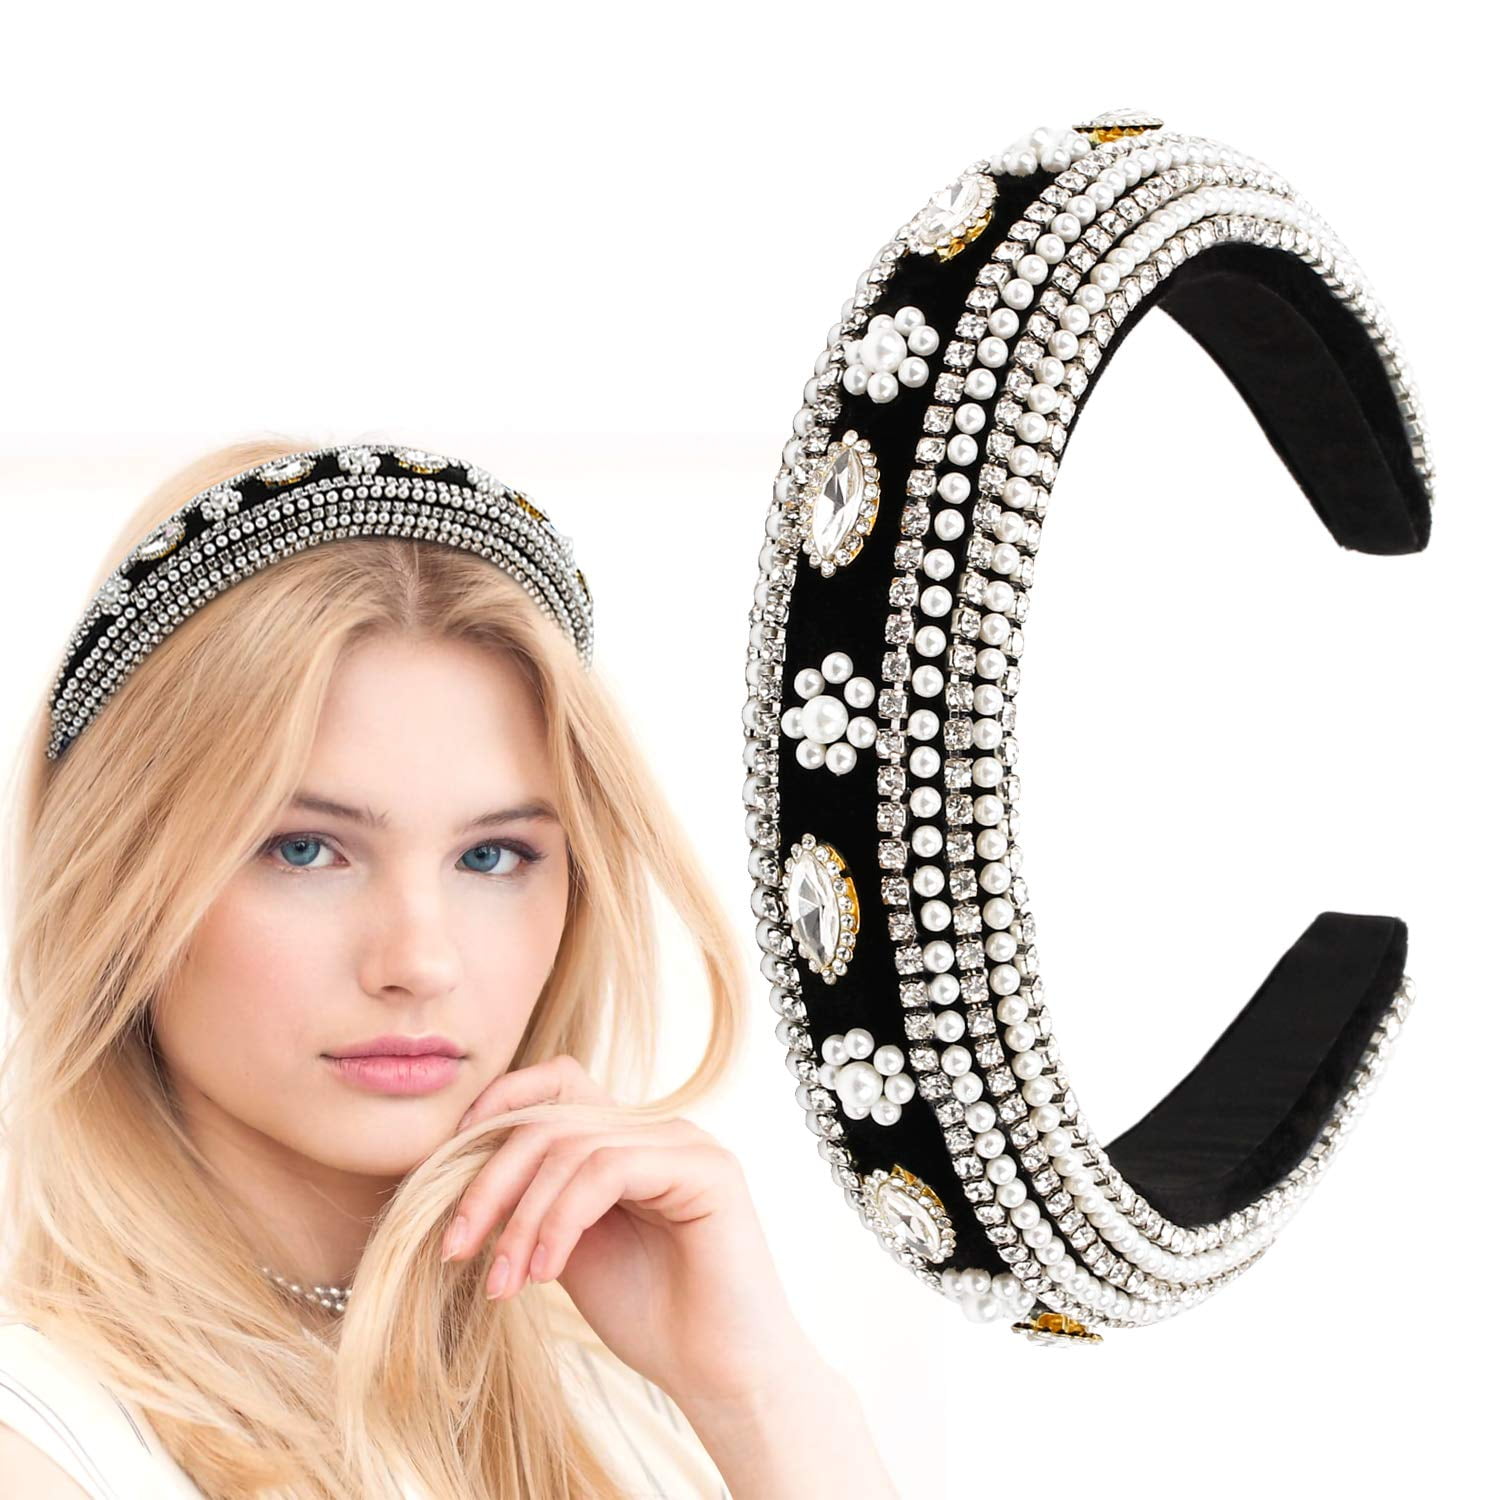 Women Baroque Crystal Embellished Hairband Pearl Headband Accessories Hair Party